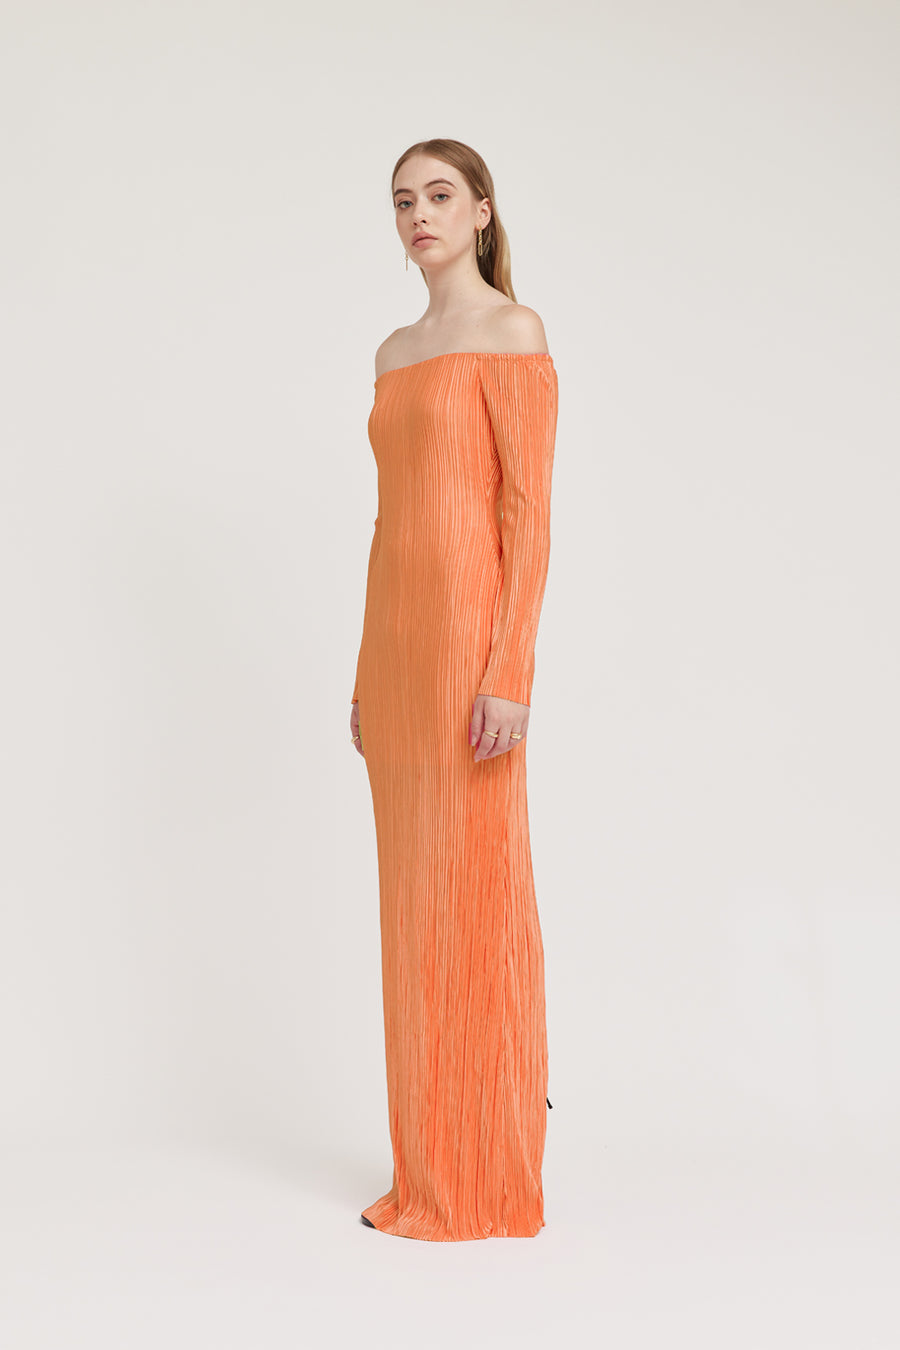 CARRIE DRESS - APRICOT